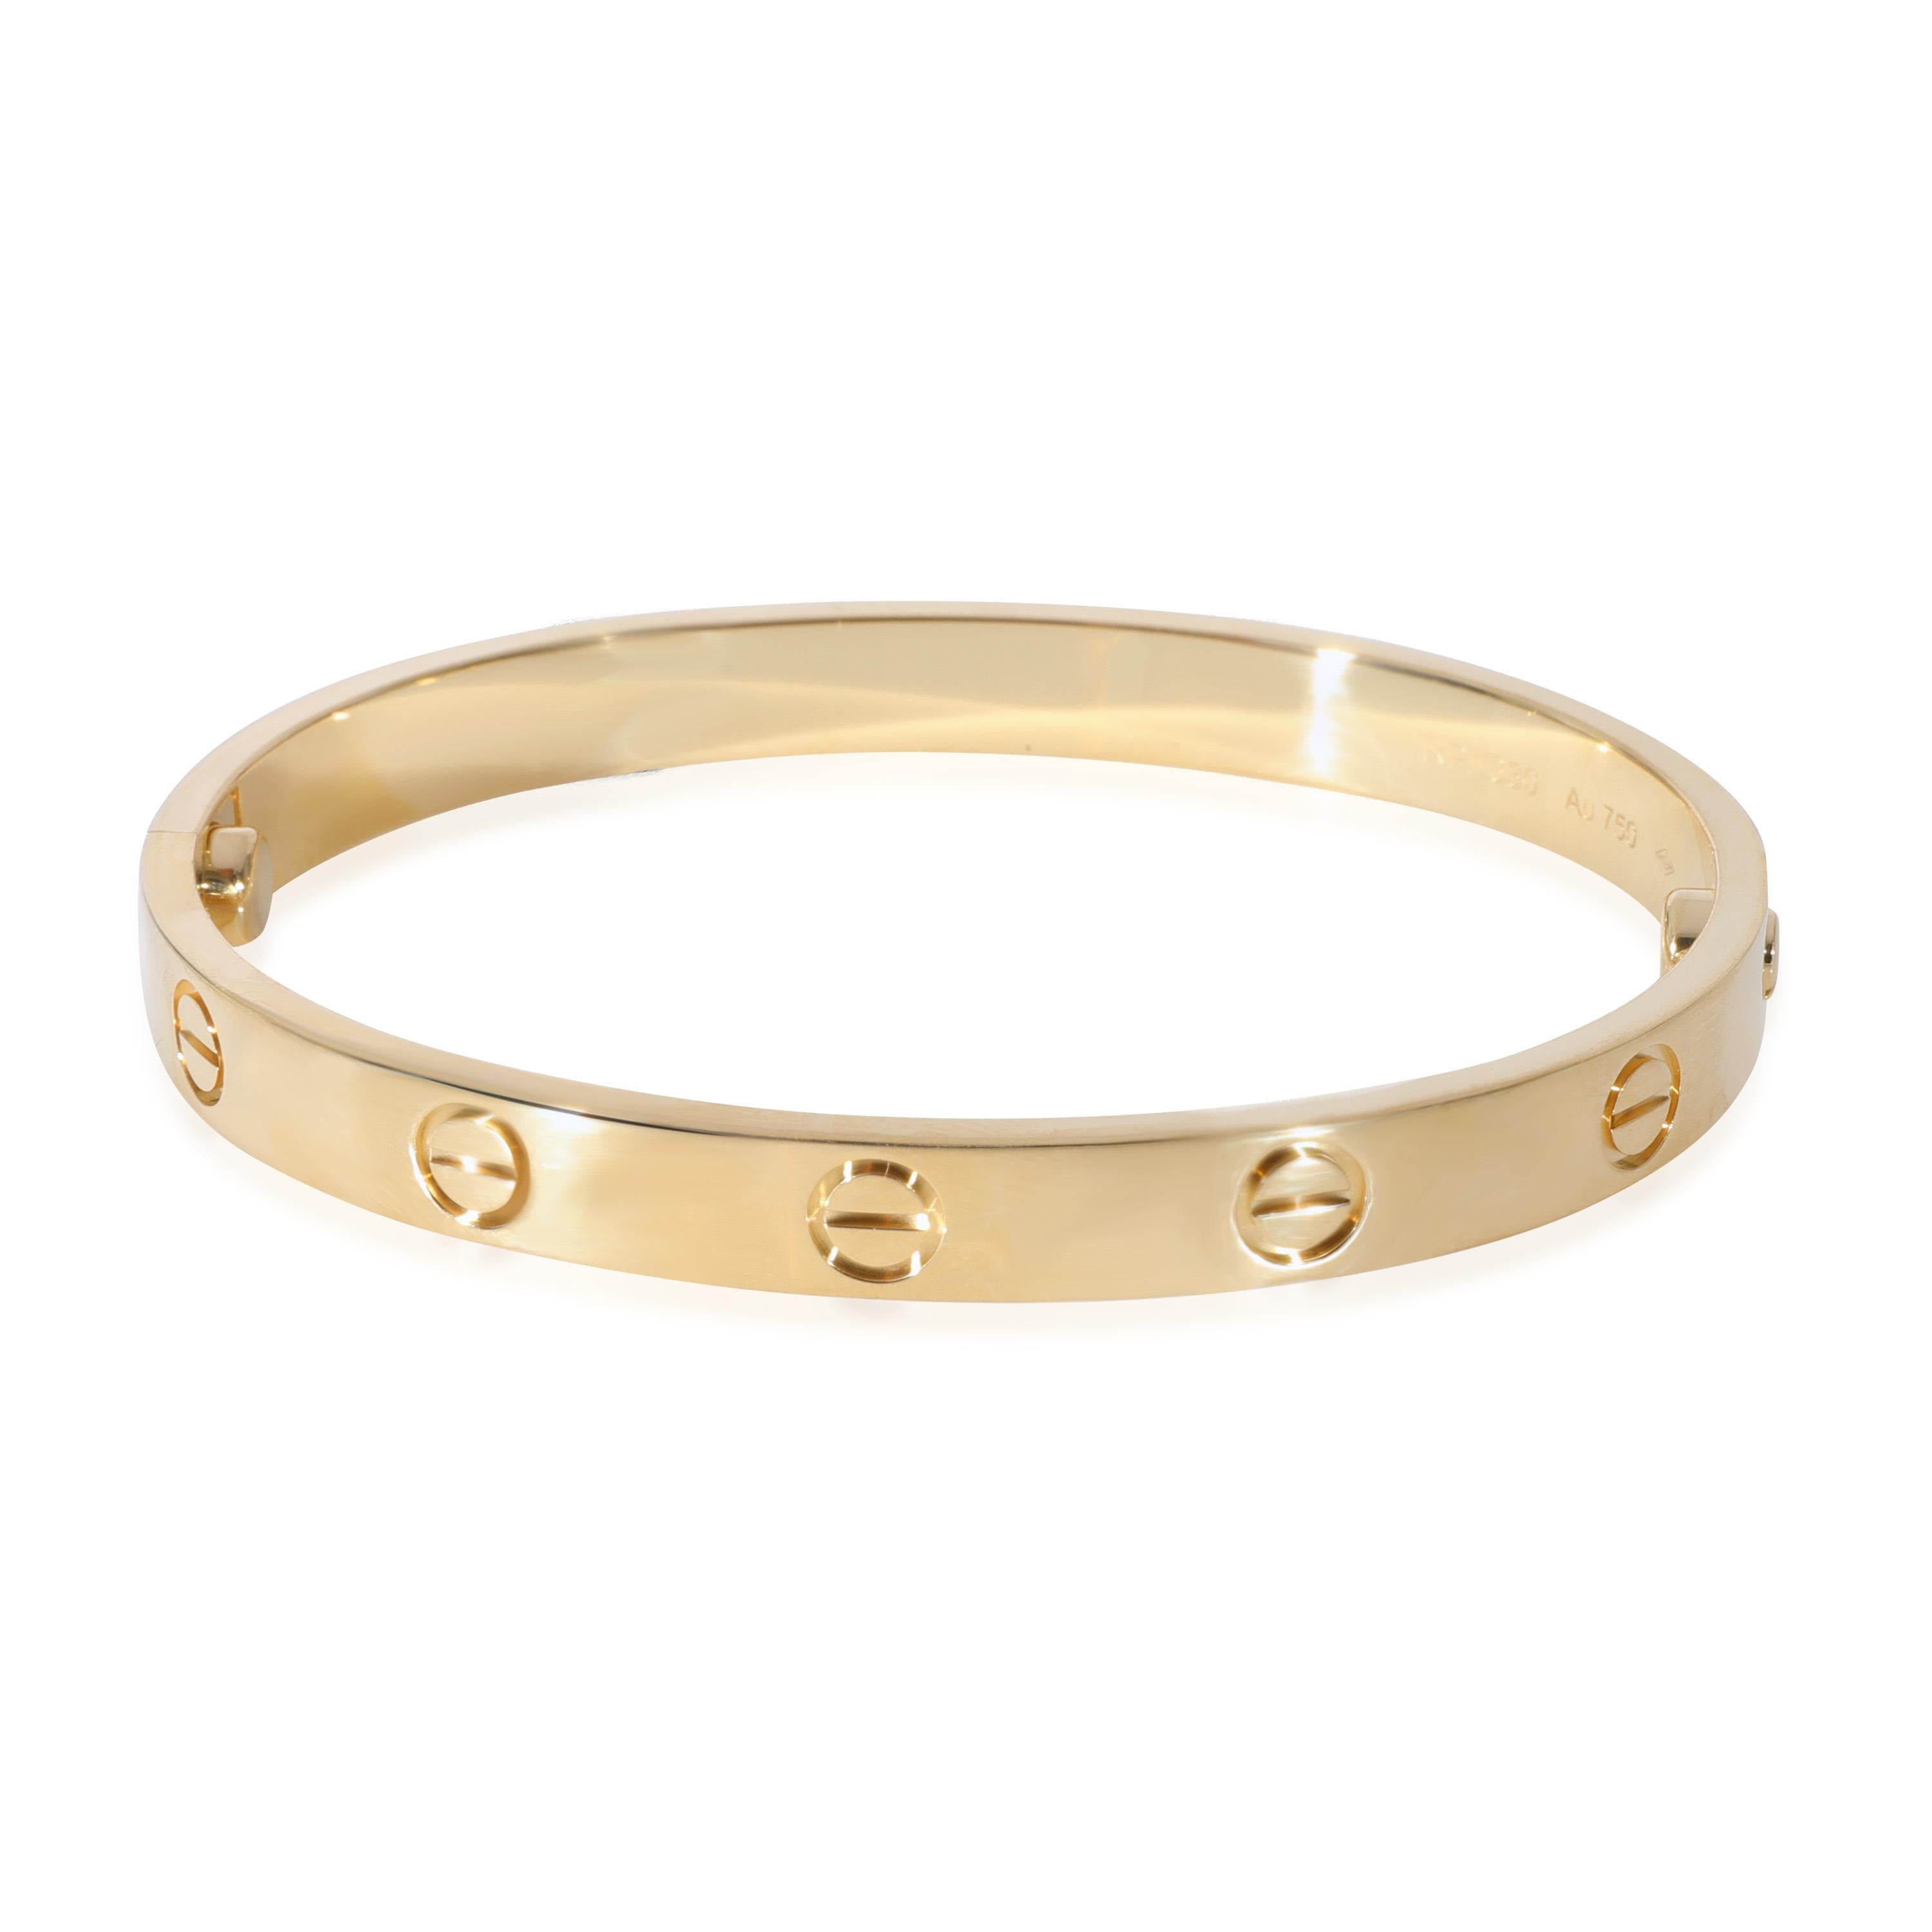 Cartier Love Bracelet in 18k Yellow Gold

PRIMARY DETAILS
SKU: 129679
Listing Title: Cartier Love Bracelet in 18k Yellow Gold
Condition Description: Cartier's Love collection is the epitome of iconic, from the recognizable designs to the history